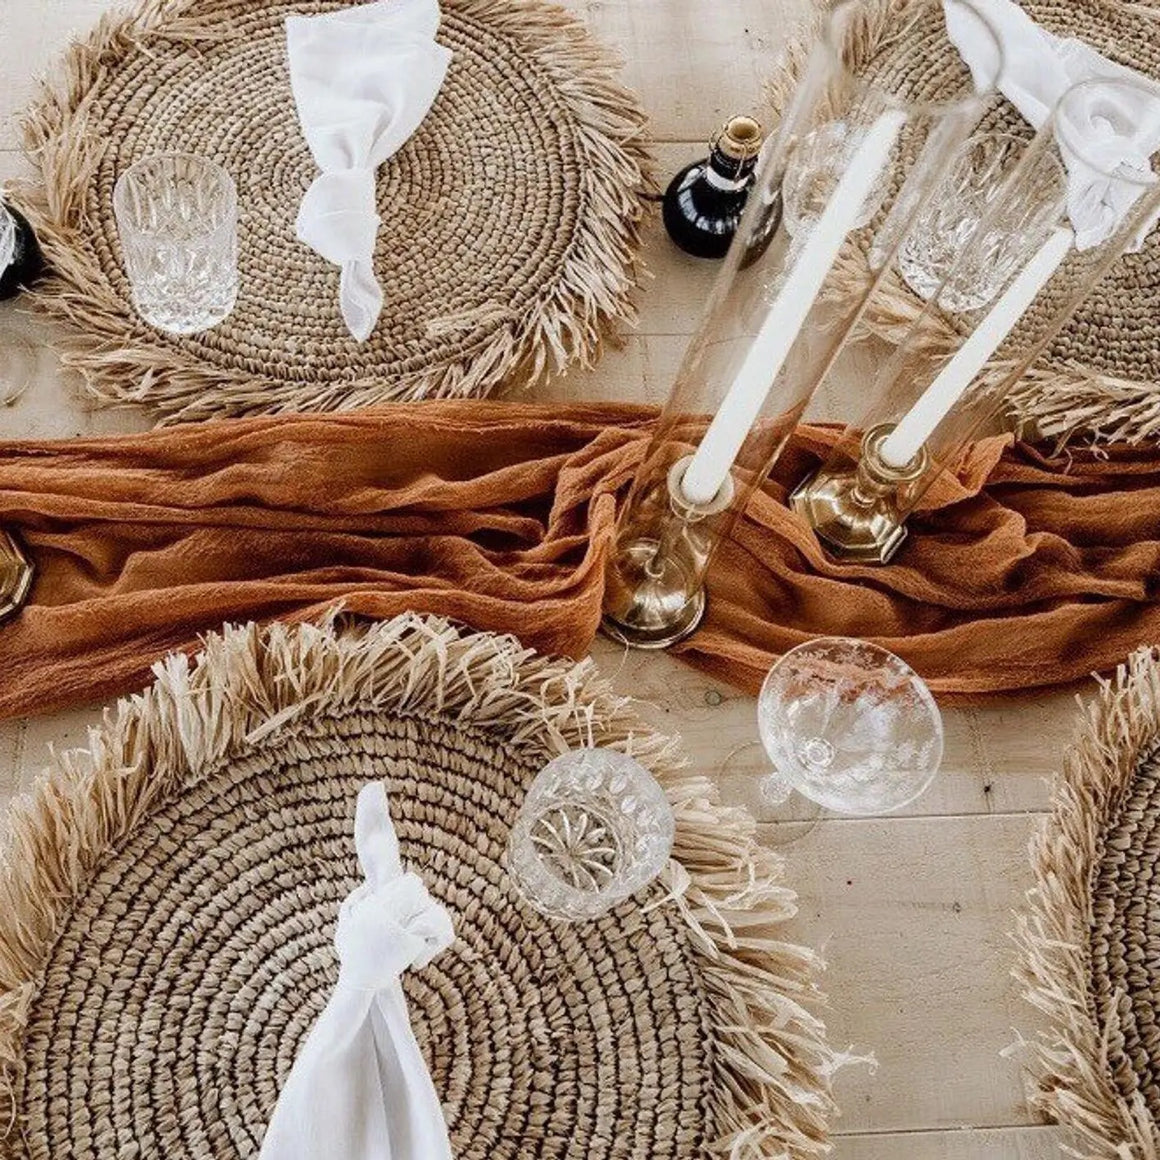 PLACEMATS - BOHO WOVEN SEAGRASS RATTAN WITH FRINGE